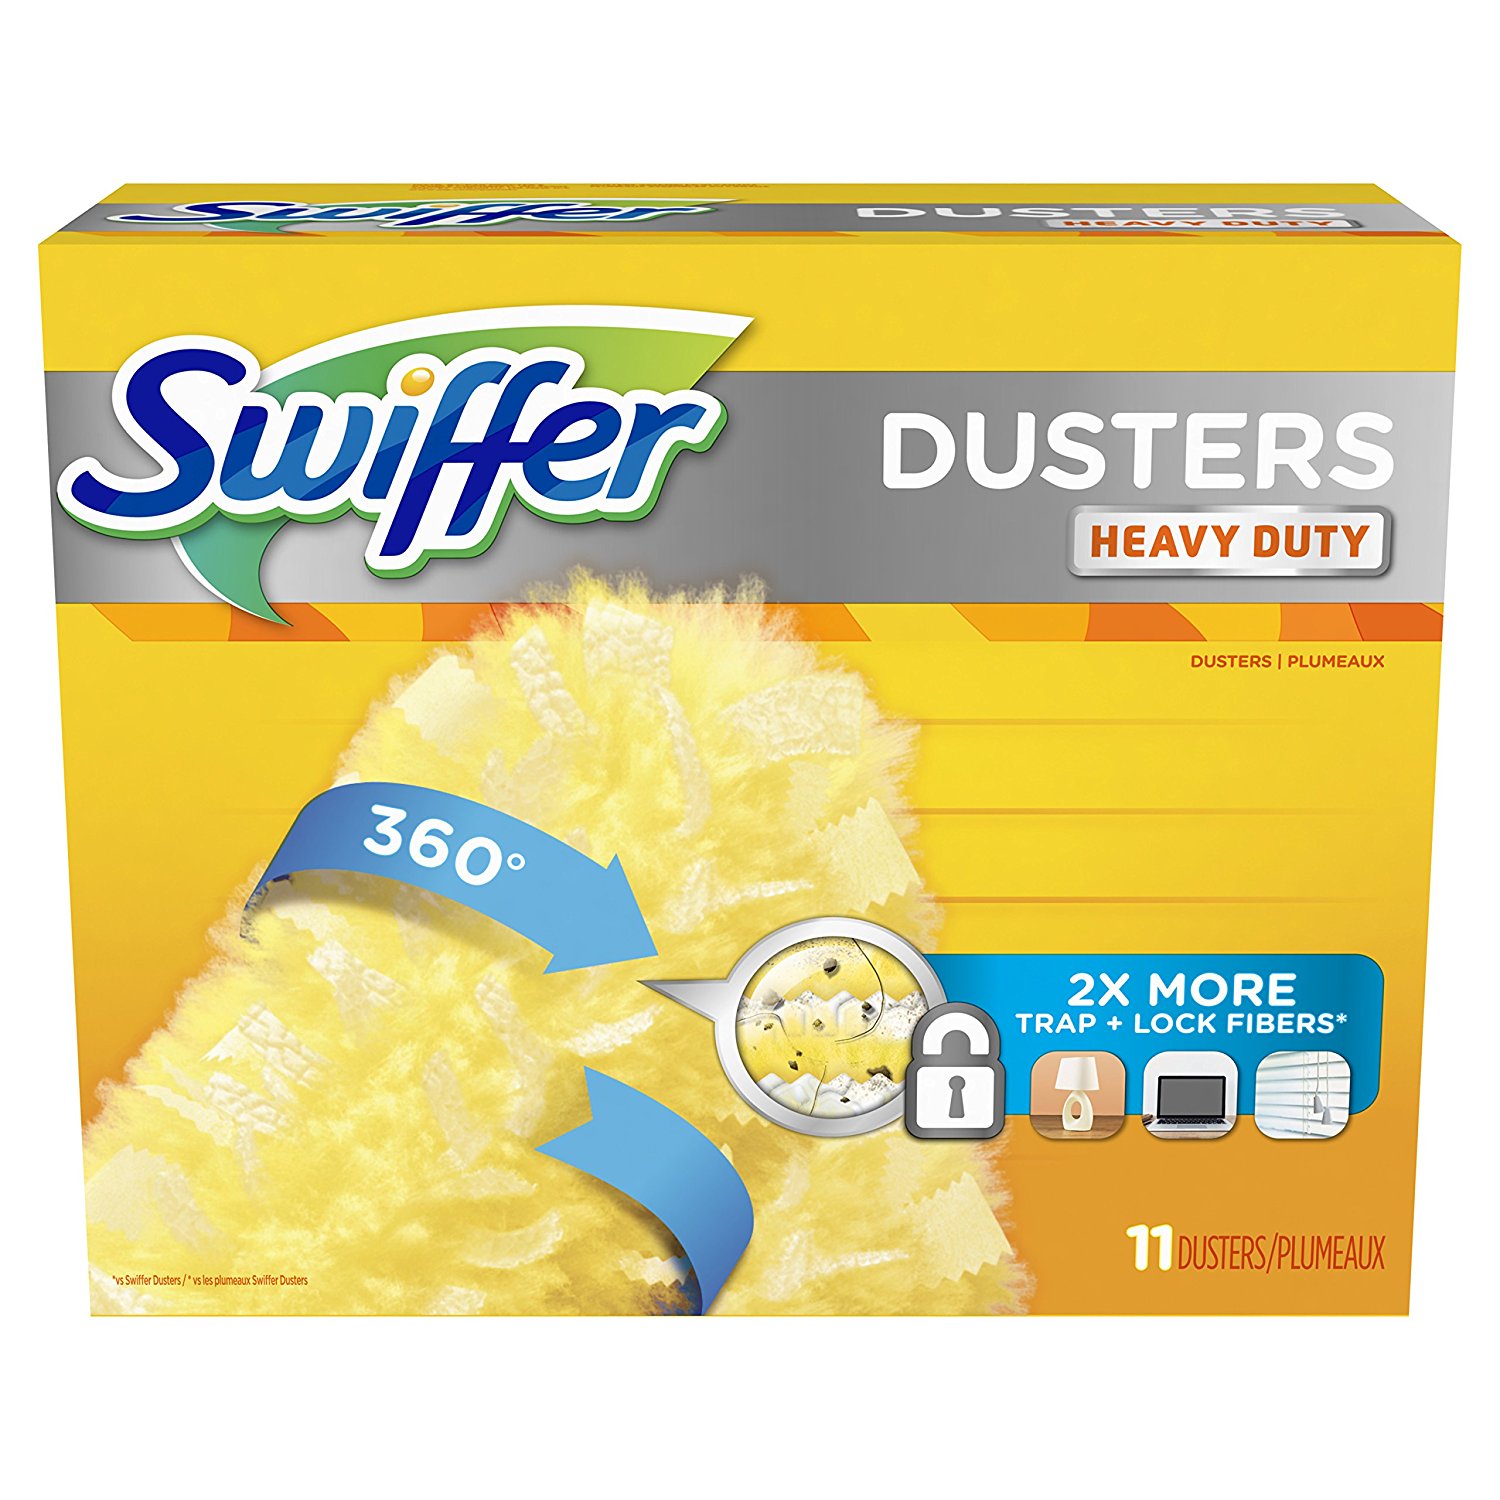 Swiffer 360 Dusters Heavy Duty Refills 11 Count Only $6.60 Shipped!